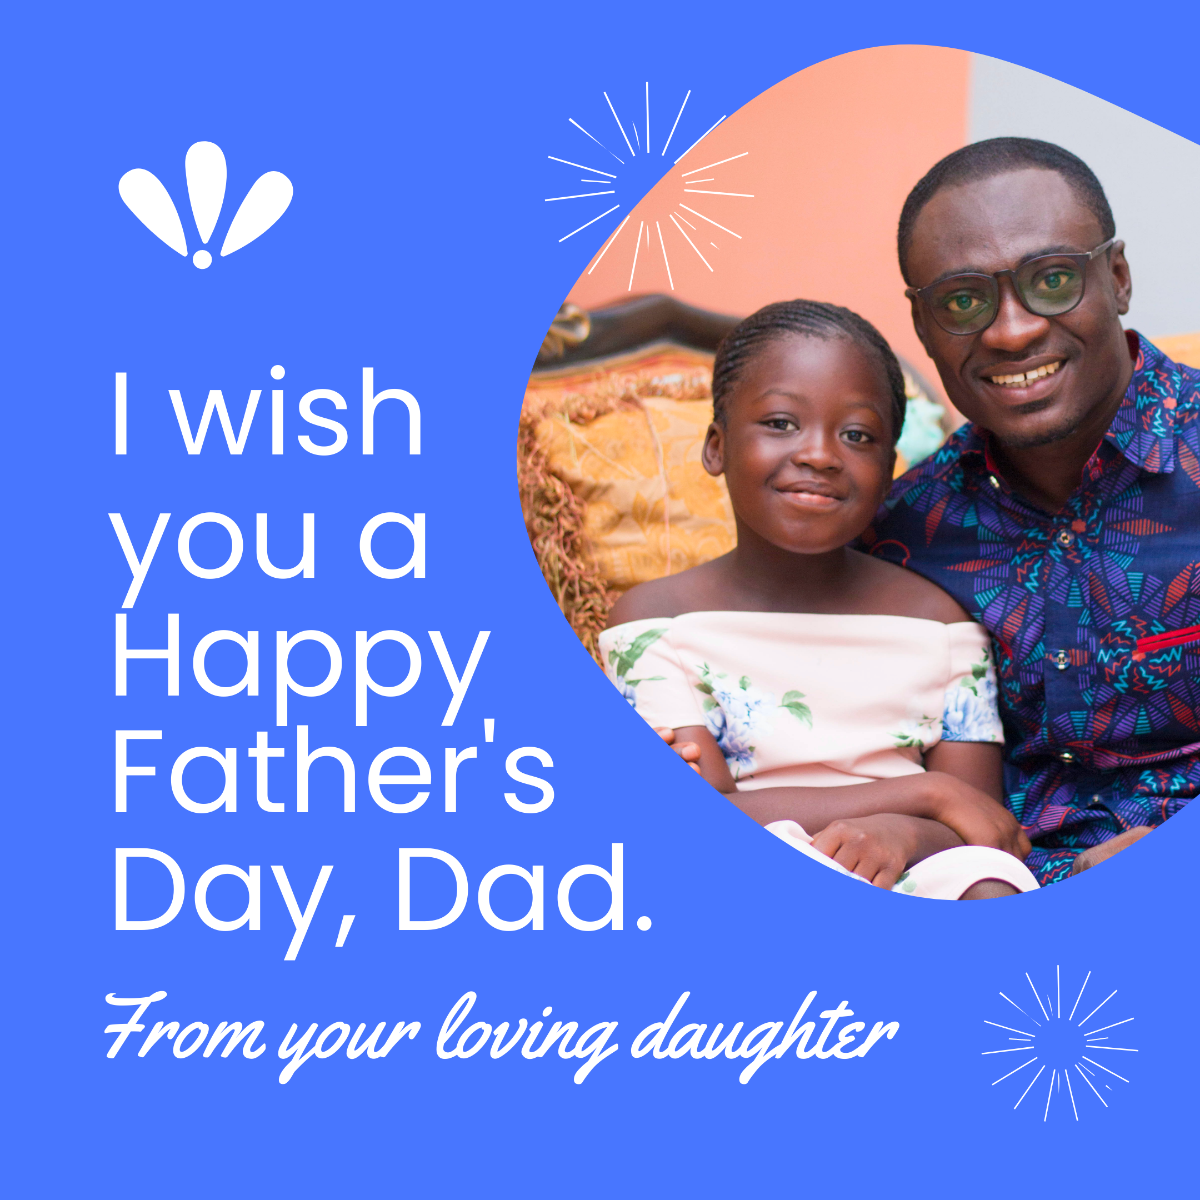 Happy Father's Day Wishes From Daughter